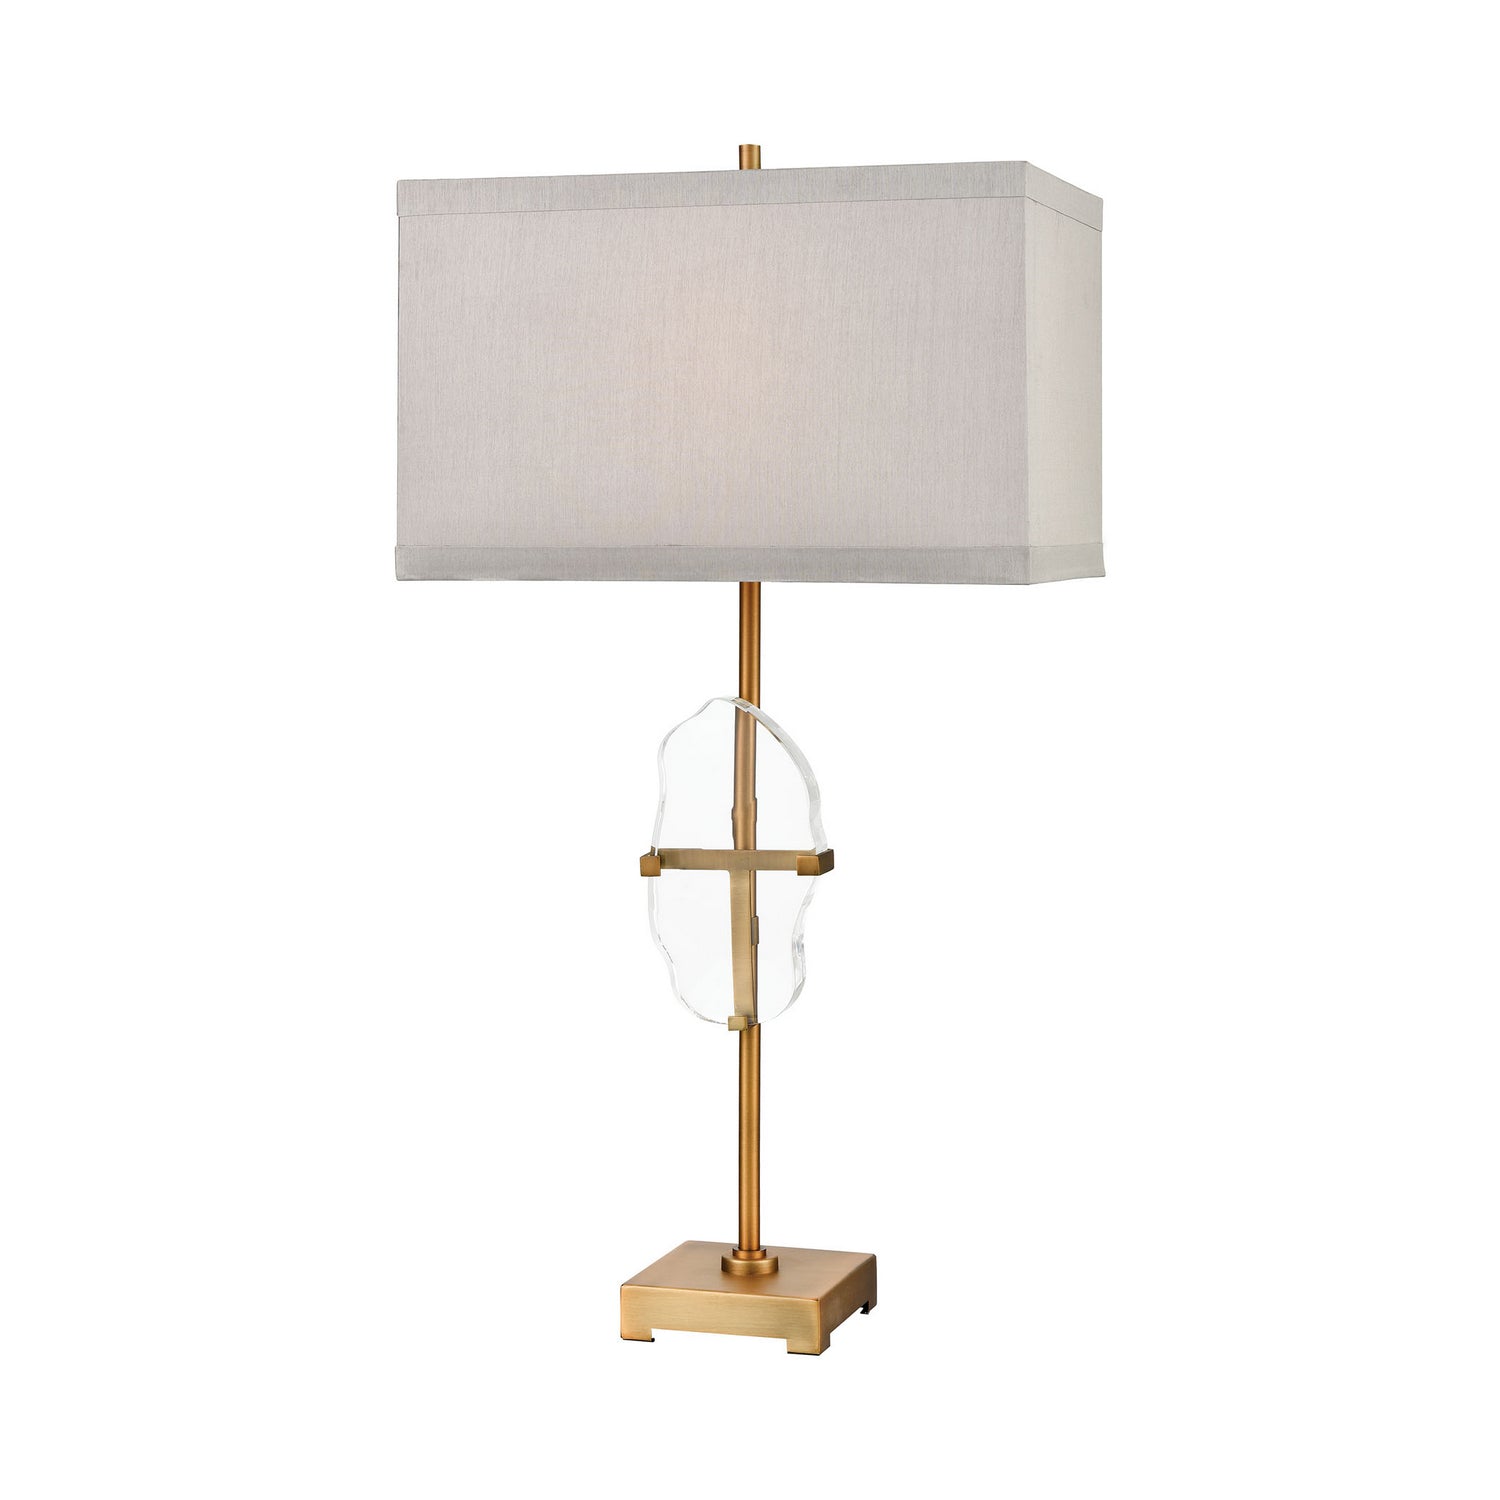 ELK Home - D3645 - One Light Table Lamp - Priorato - Clear